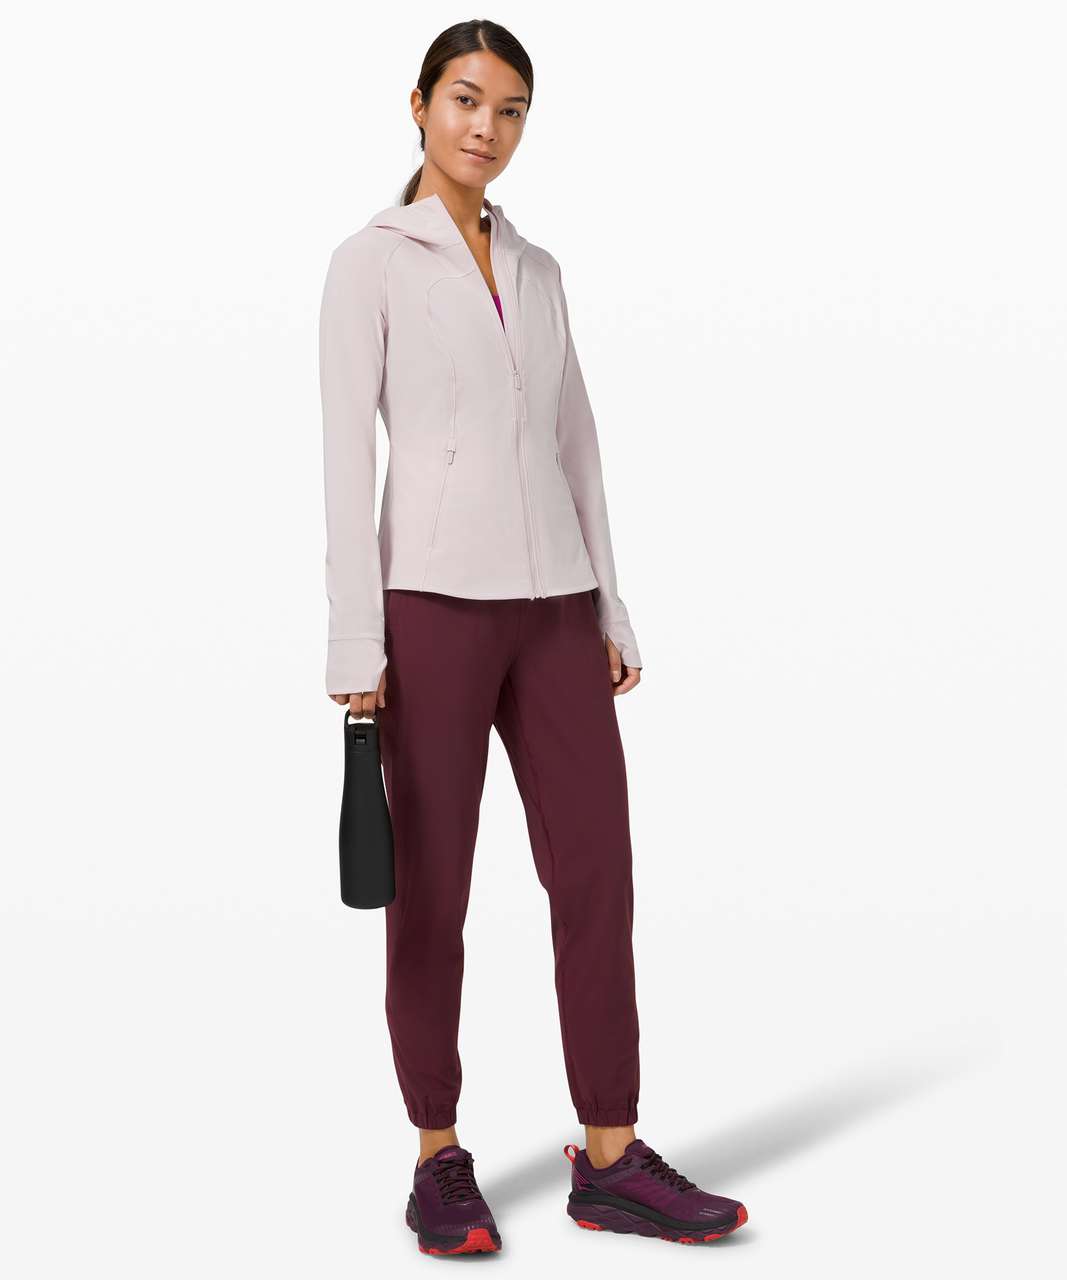 Lululemon Adapted State Jogger - Cassis